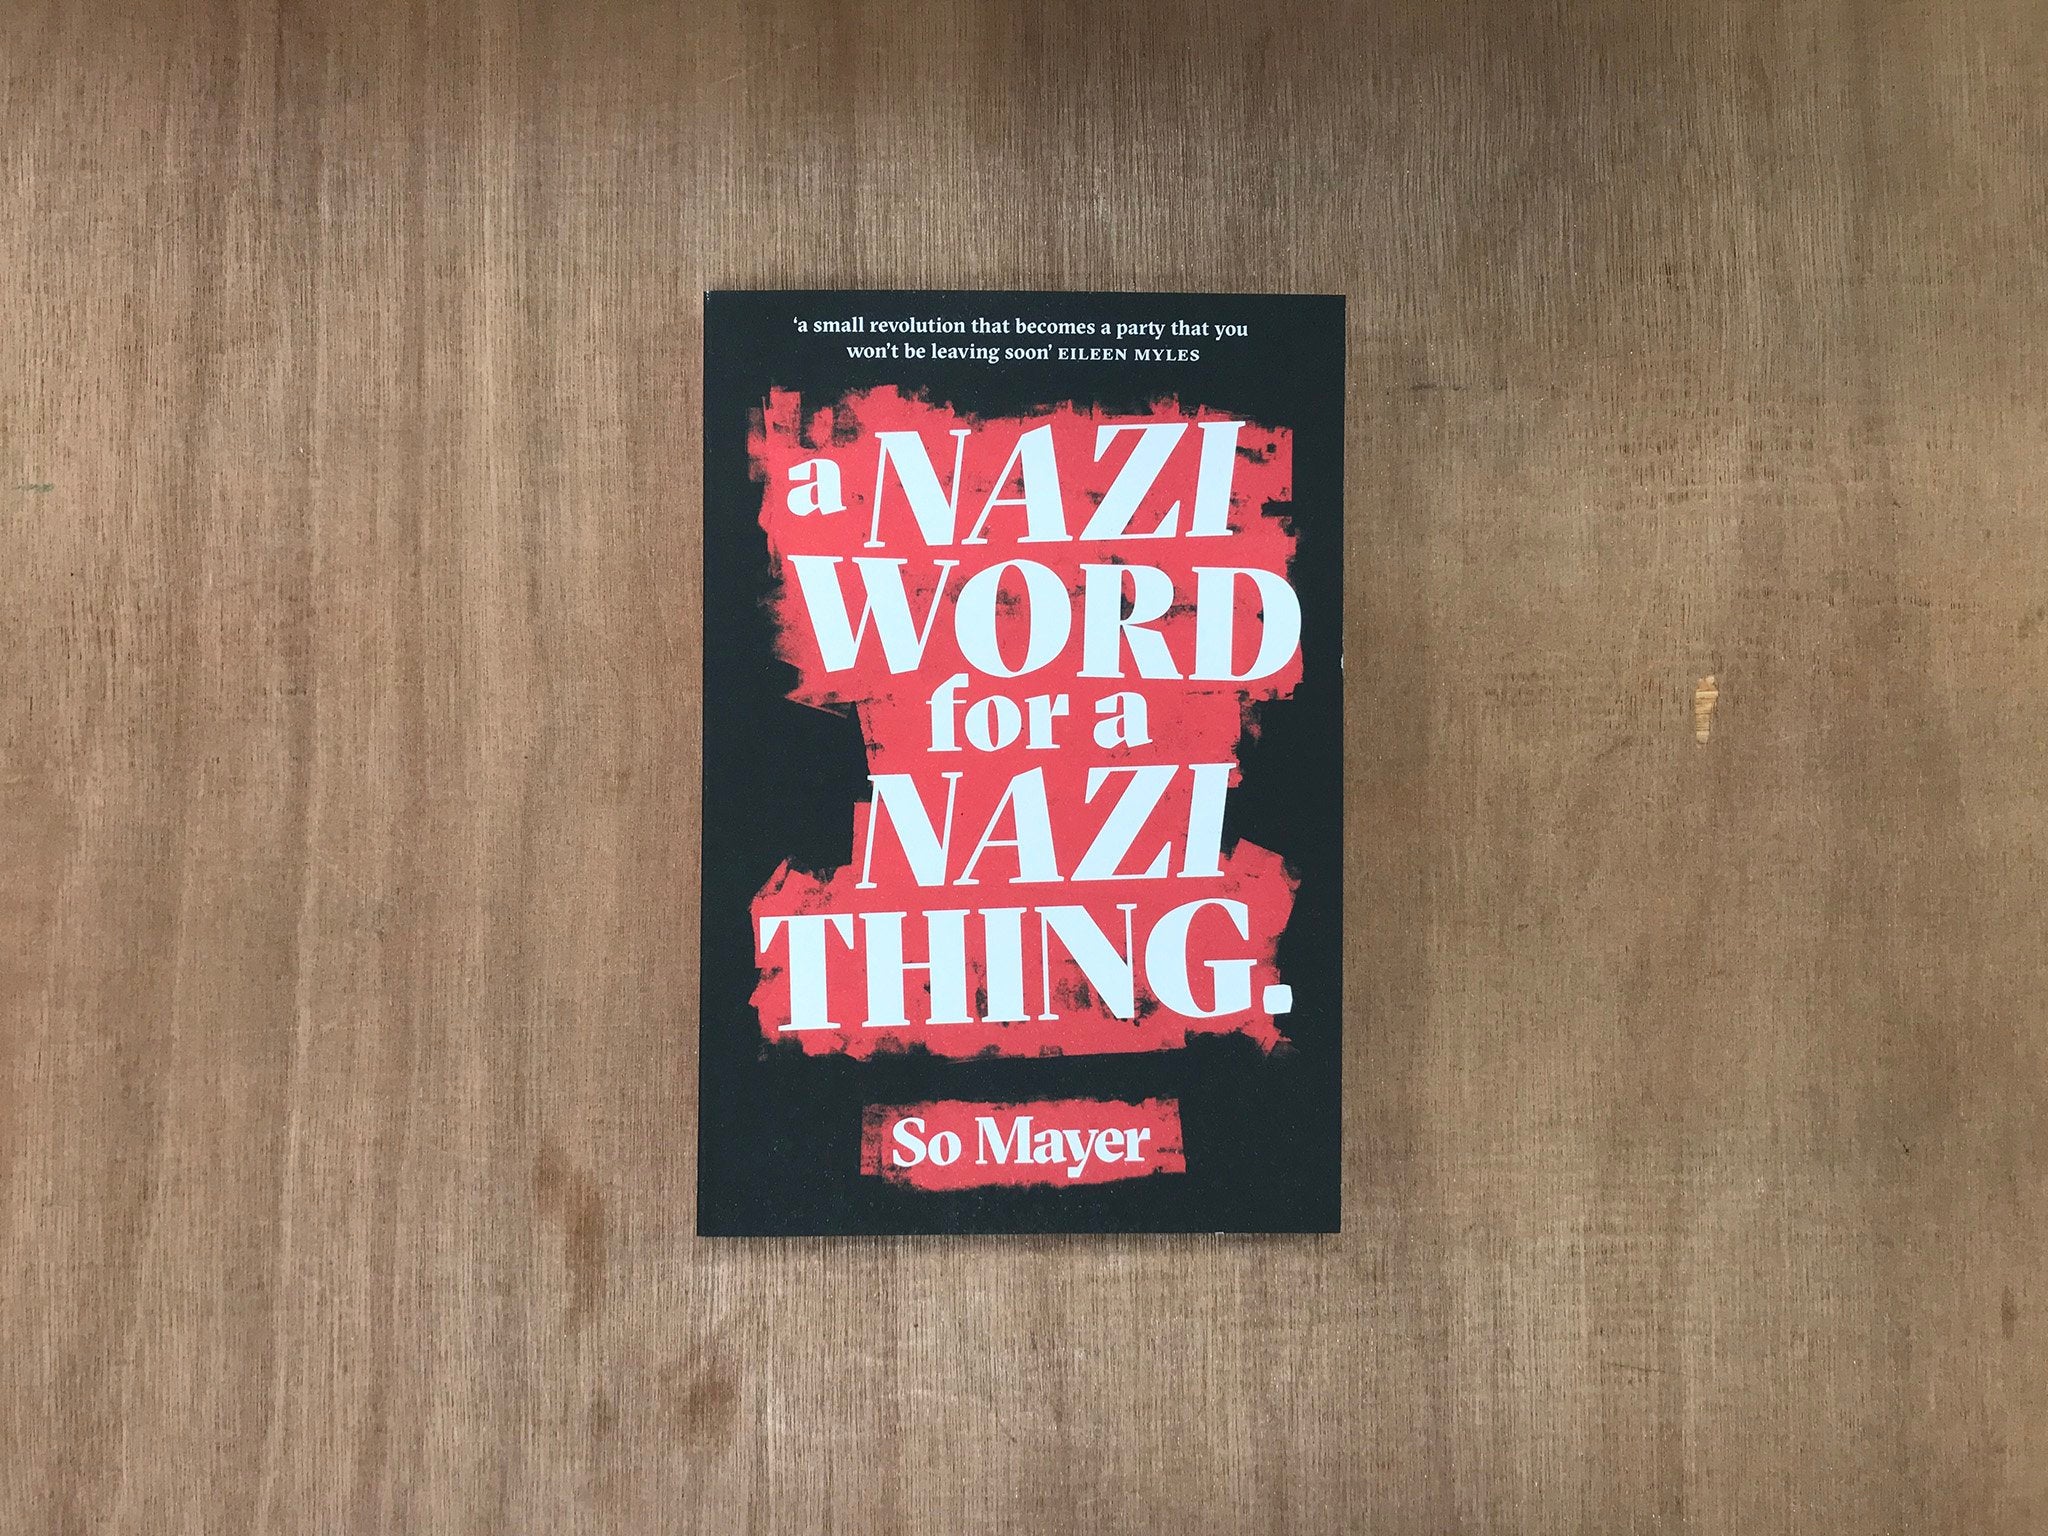 A NAZI WORD FOR A NAZI THING by So Mayer